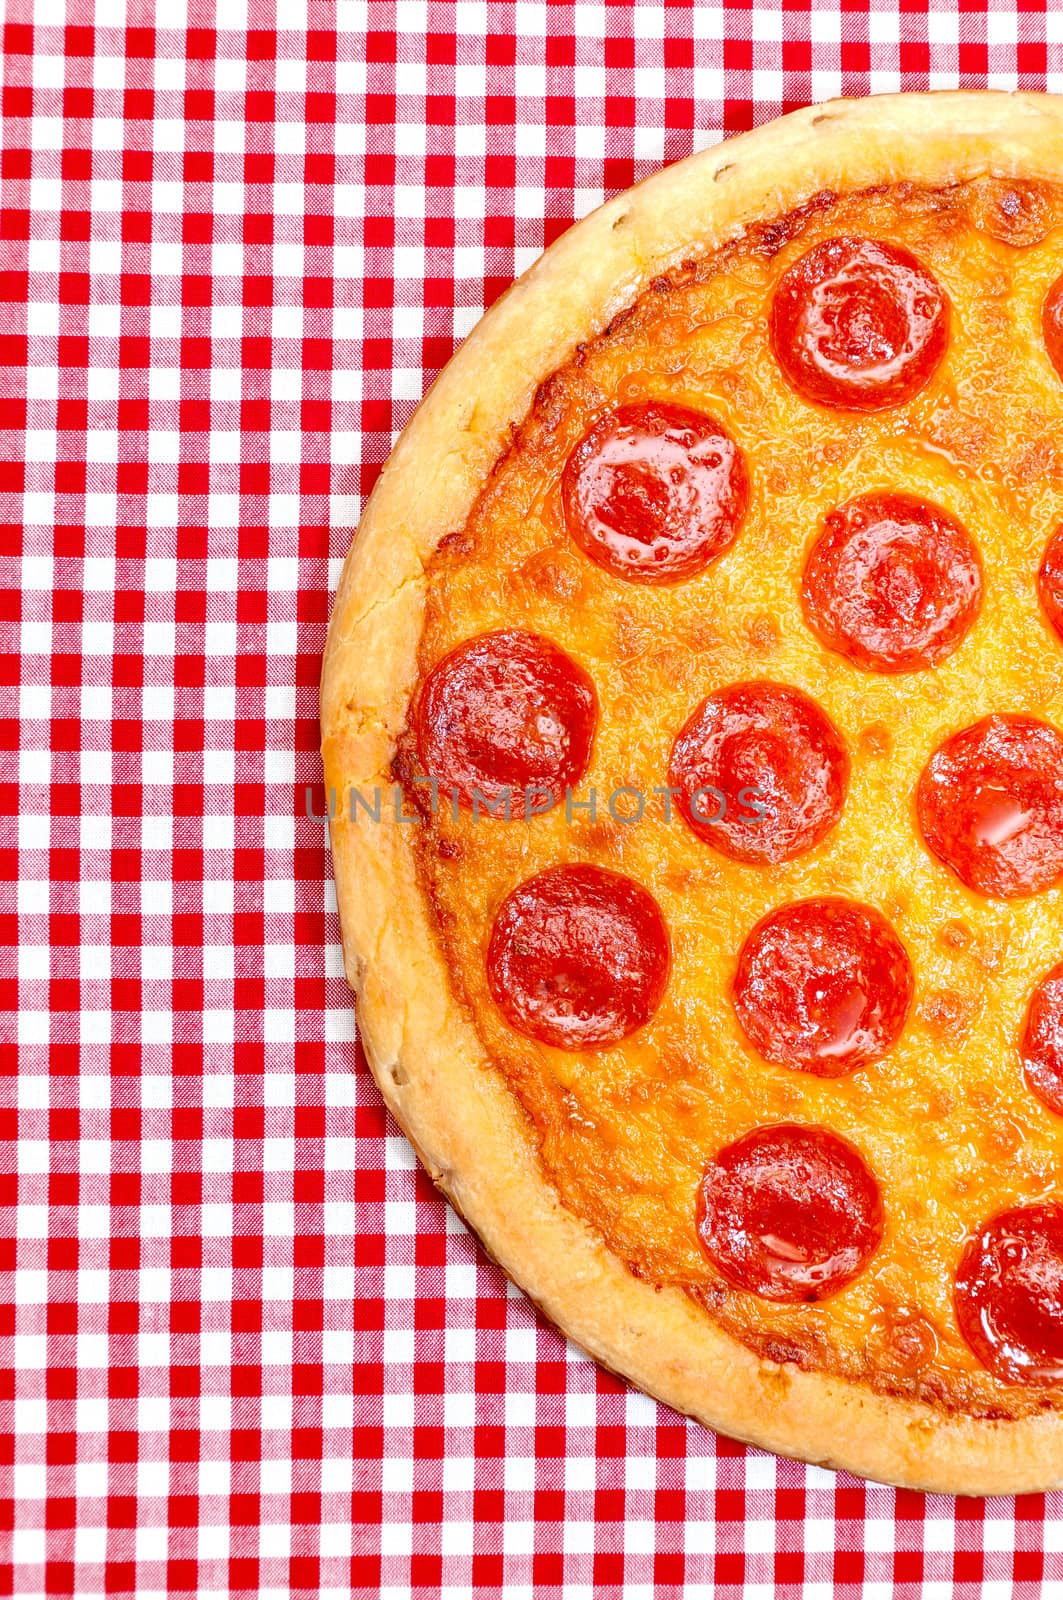 Pepperoni pizza half on red gingham tablecloth.